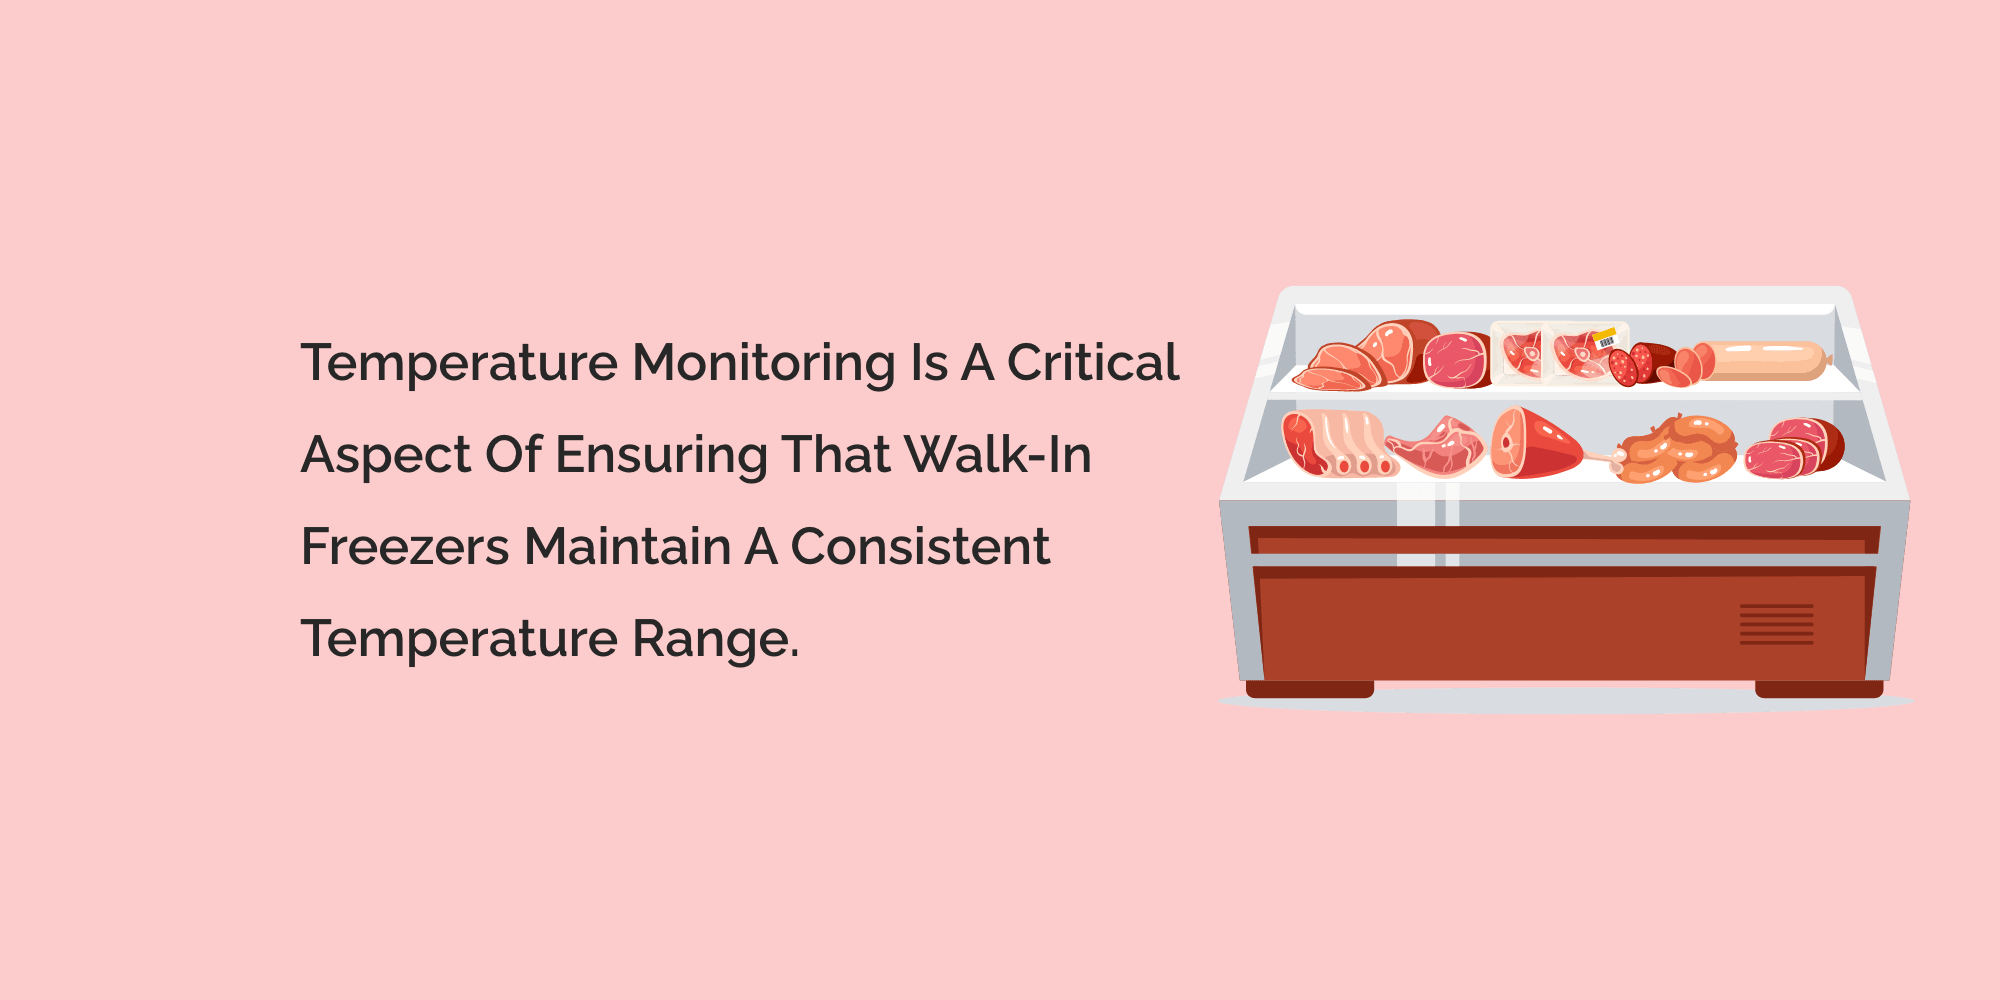 Temperature monitoring is a critical aspect of ensuring that walk-in freezers maintain a consistent temperature range.